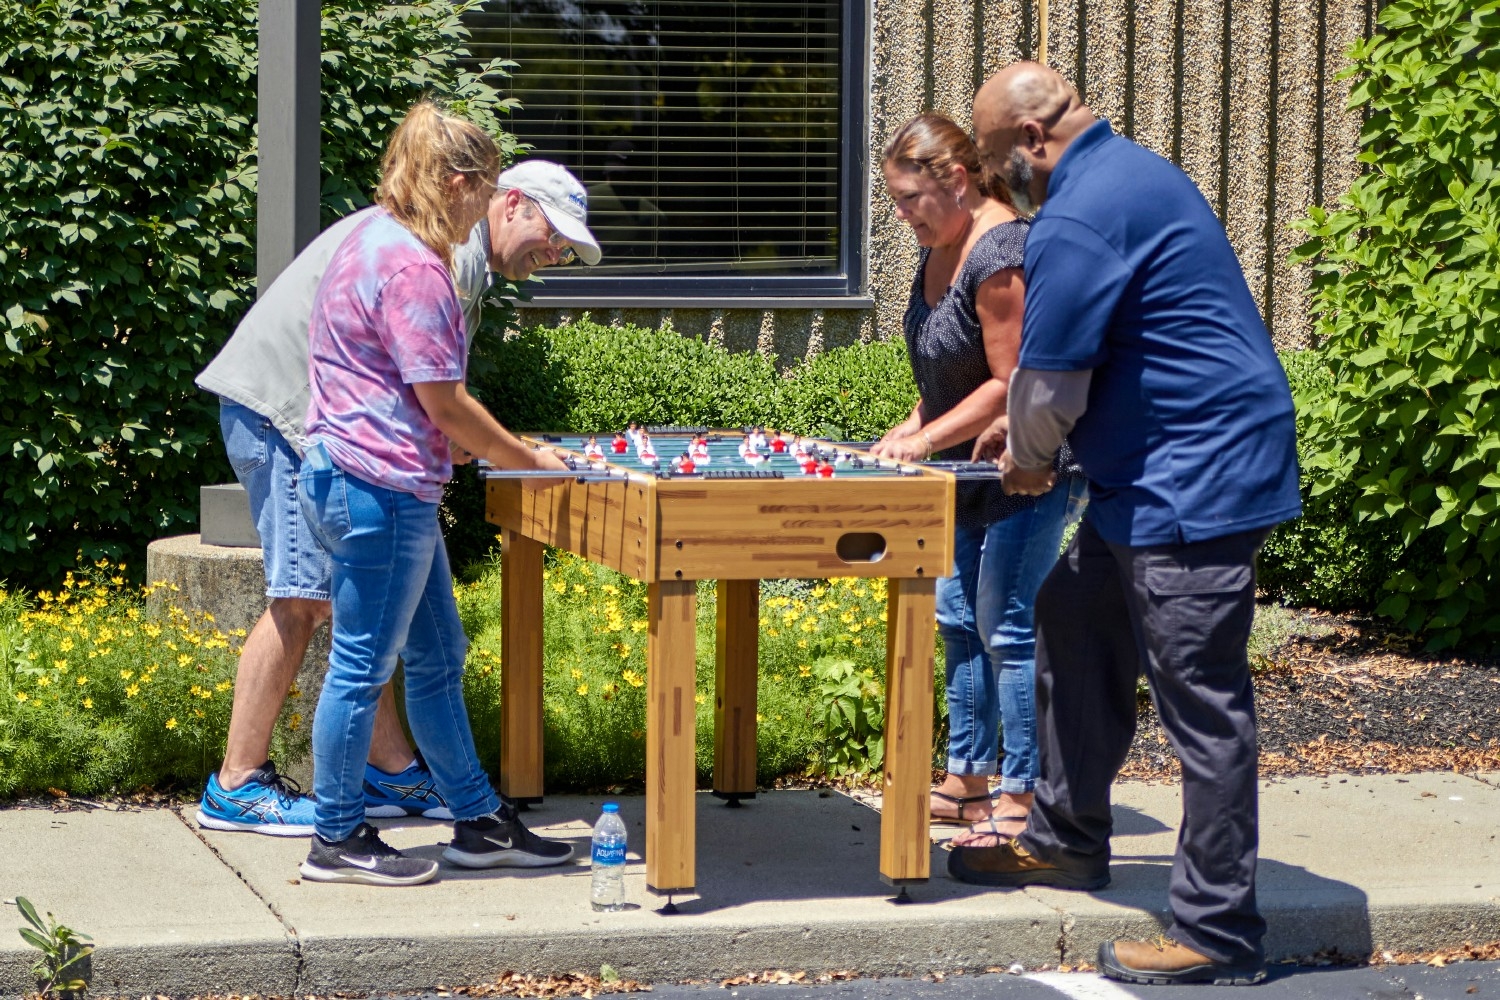 Summer Fun! Enjoying the nice weather with a cookout and summer games for a retirement celebration.